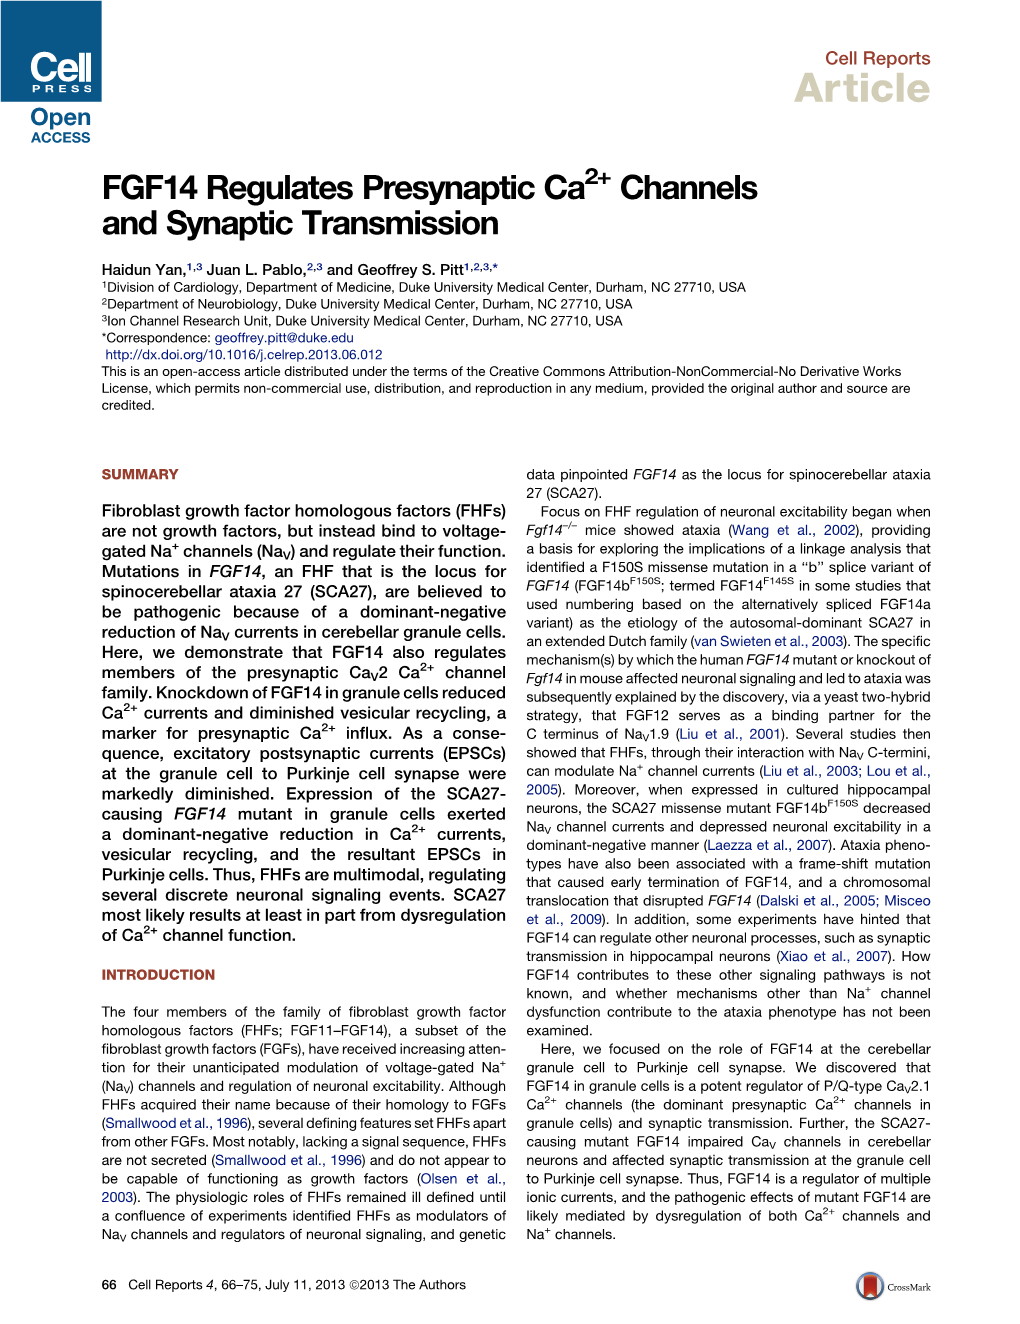 FGF14 Regulates Presynaptic Ca2+ Channels and Synaptic Transmission